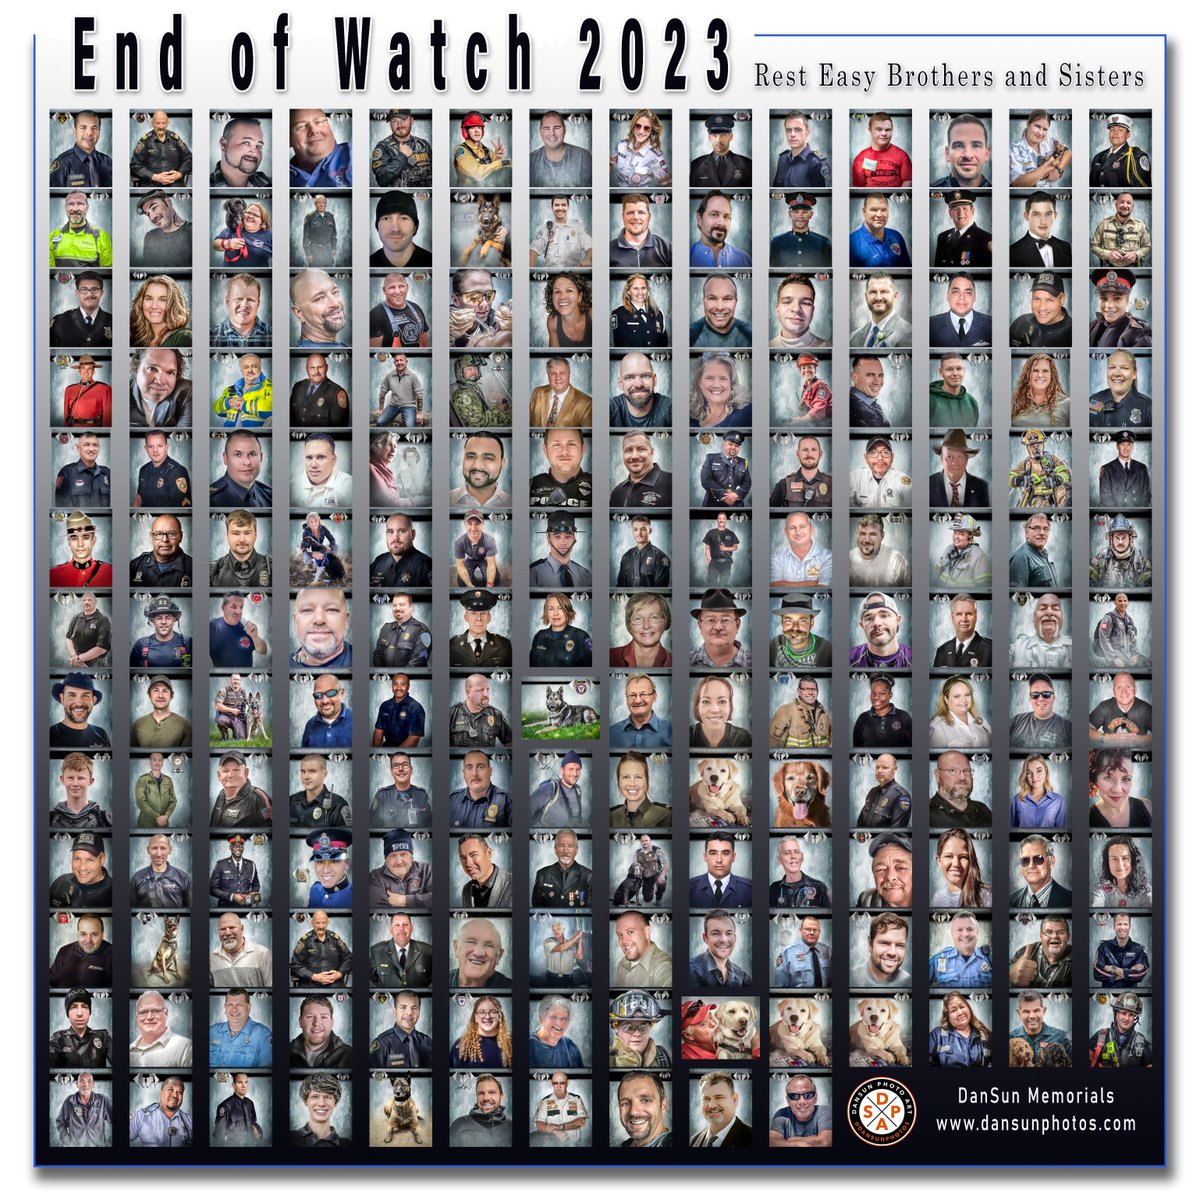 In 2023, I created 247 memorial portraits, 178 of which died in 2023. All portraits are requested, and I don’t charge a commission to create them. Have a safe and happy New Year, everyone; I hope NOT to see you in the memorial portraits I will create in 2024. Sincerely, DanSun